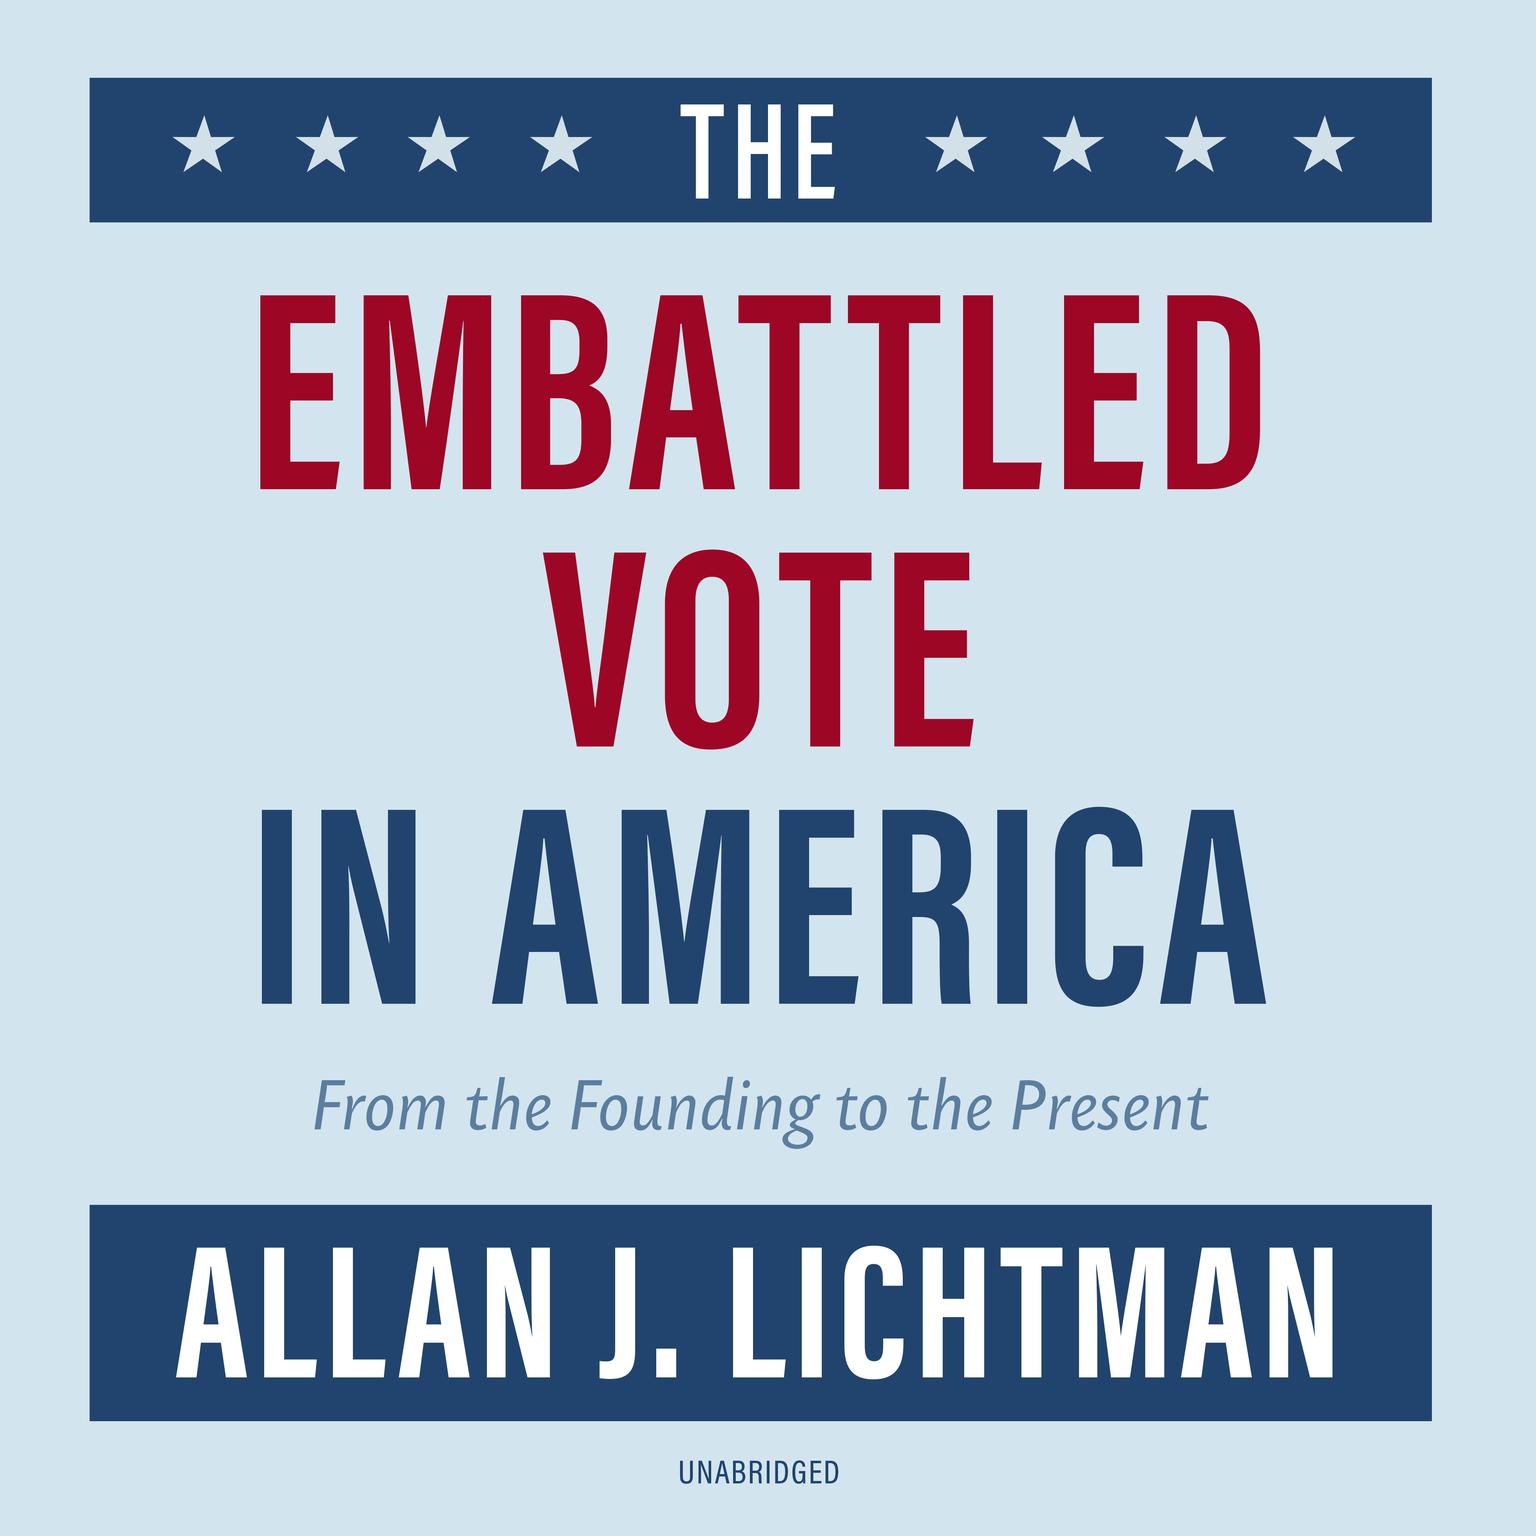 The Embattled Vote in America: From the Founding to the Present Audiobook, by Allan J. Lichtman